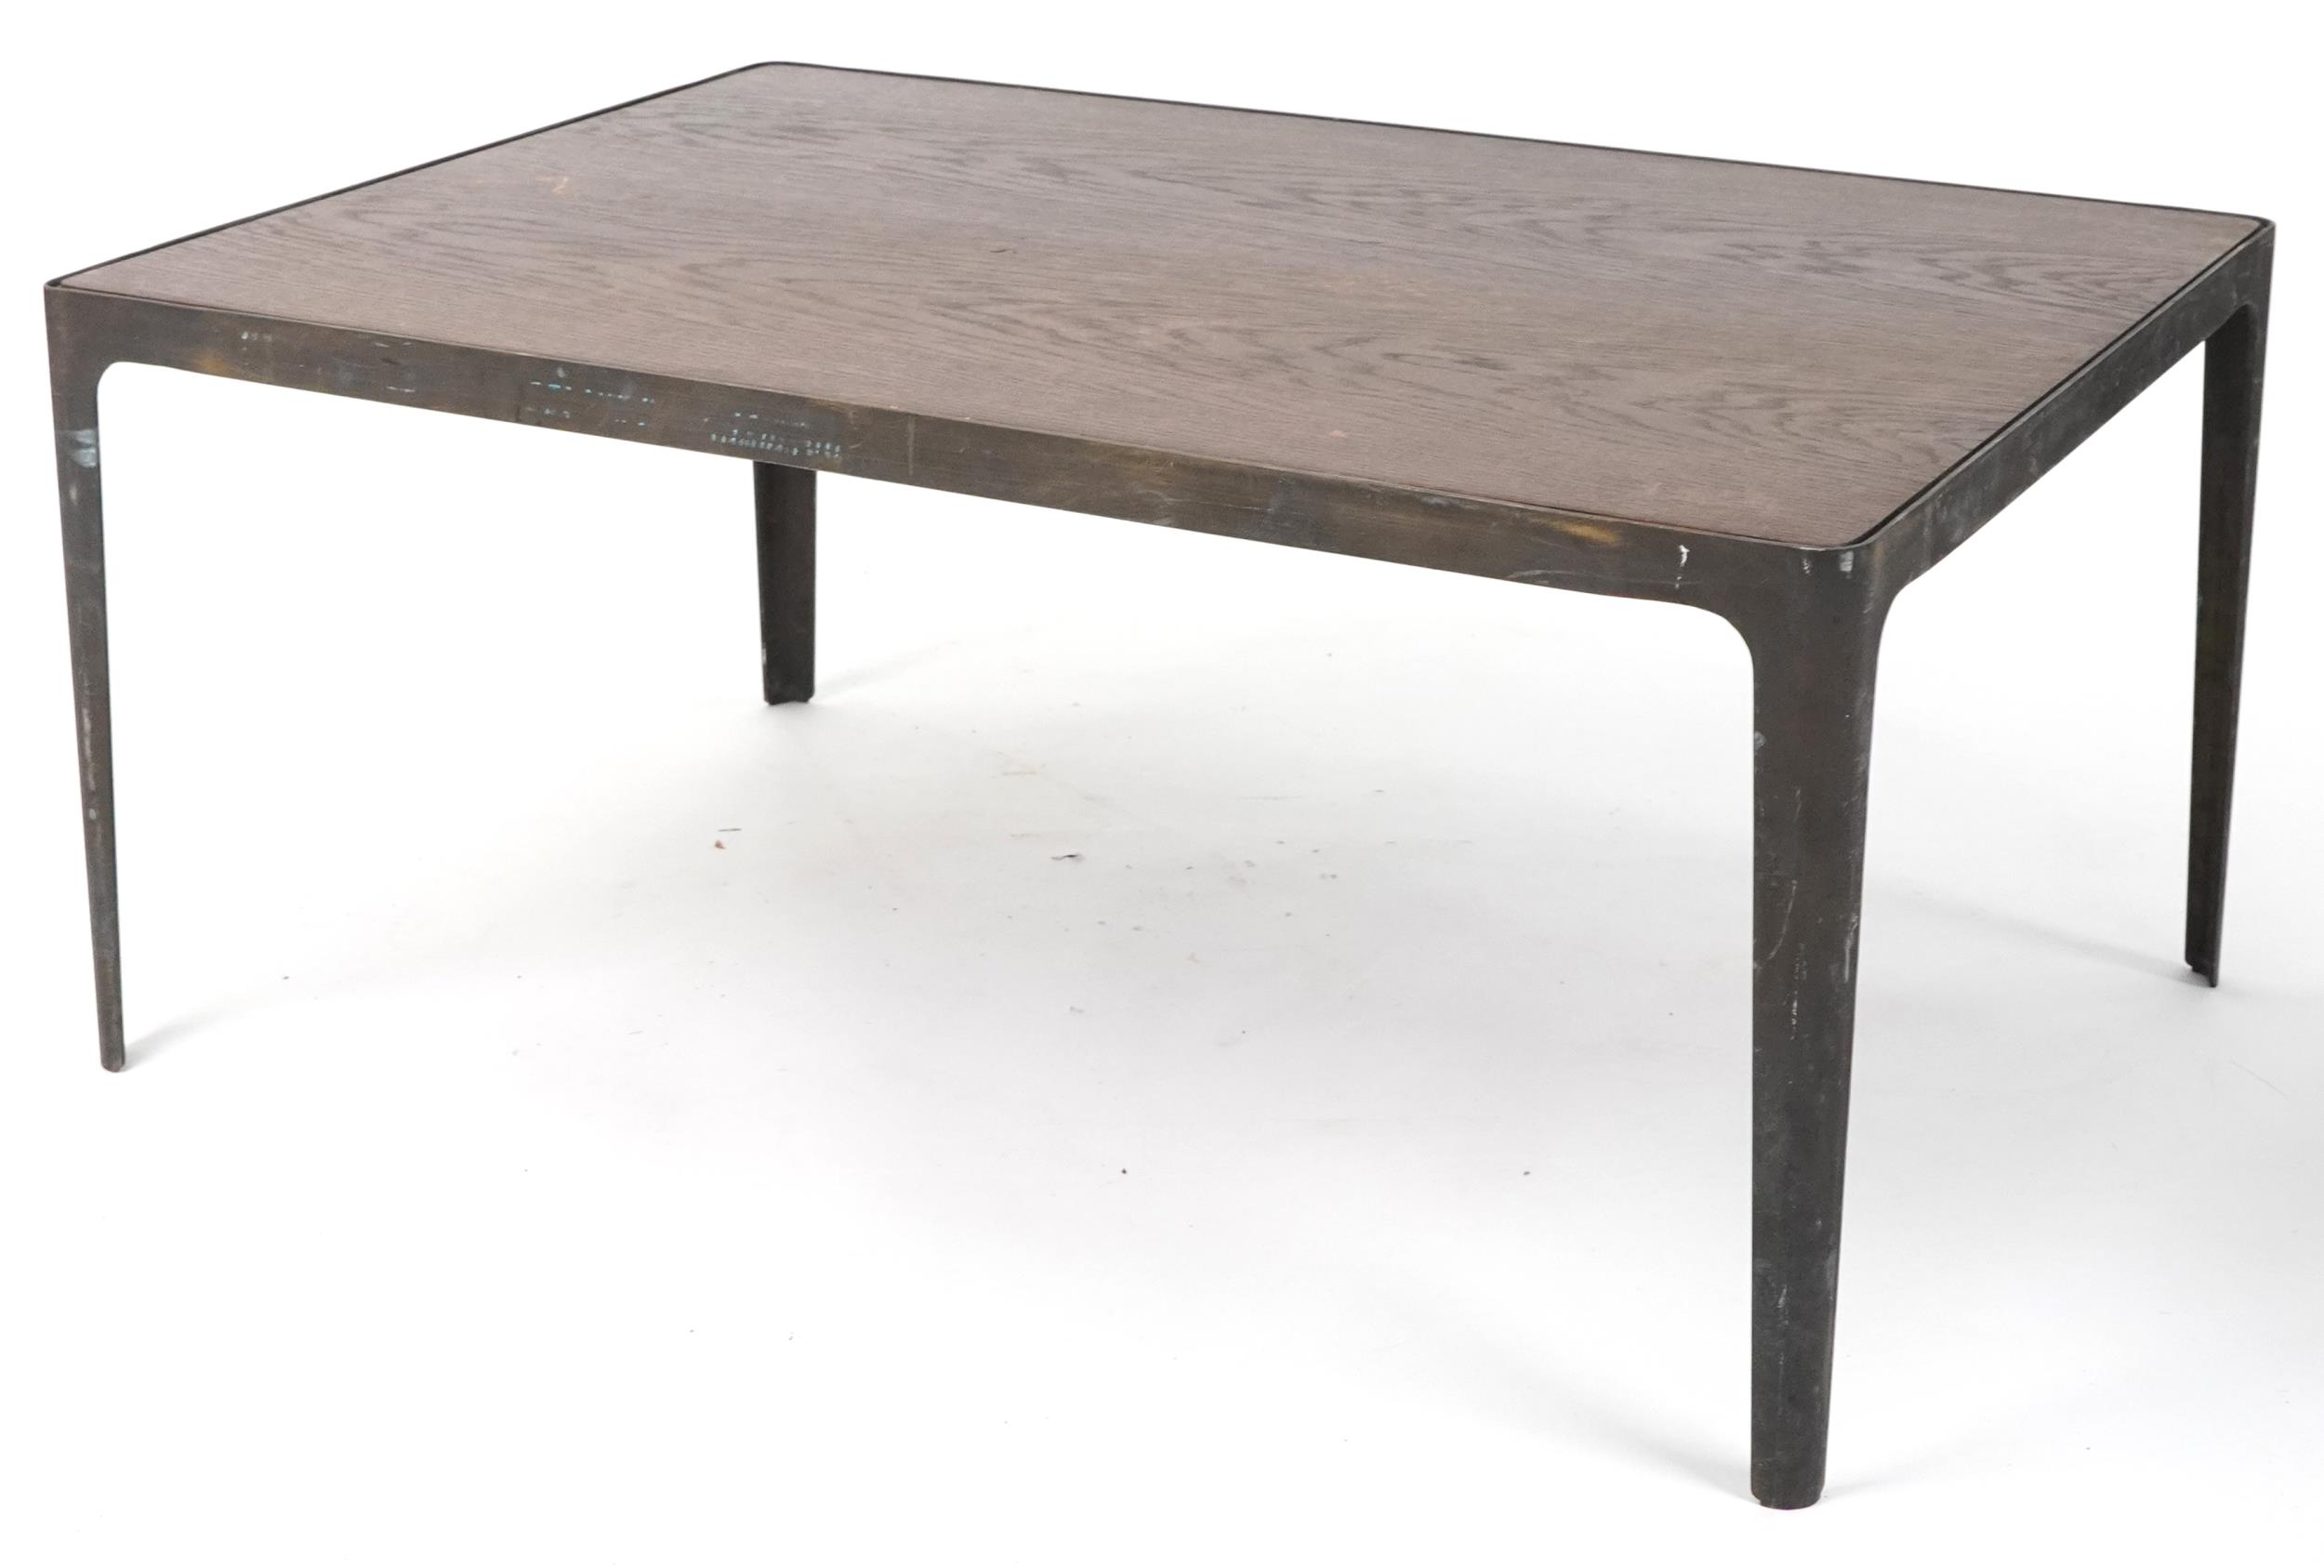 Industrial painted metal and hardwood rectangular coffee table, 45cm H x 100cm W x 70cm D